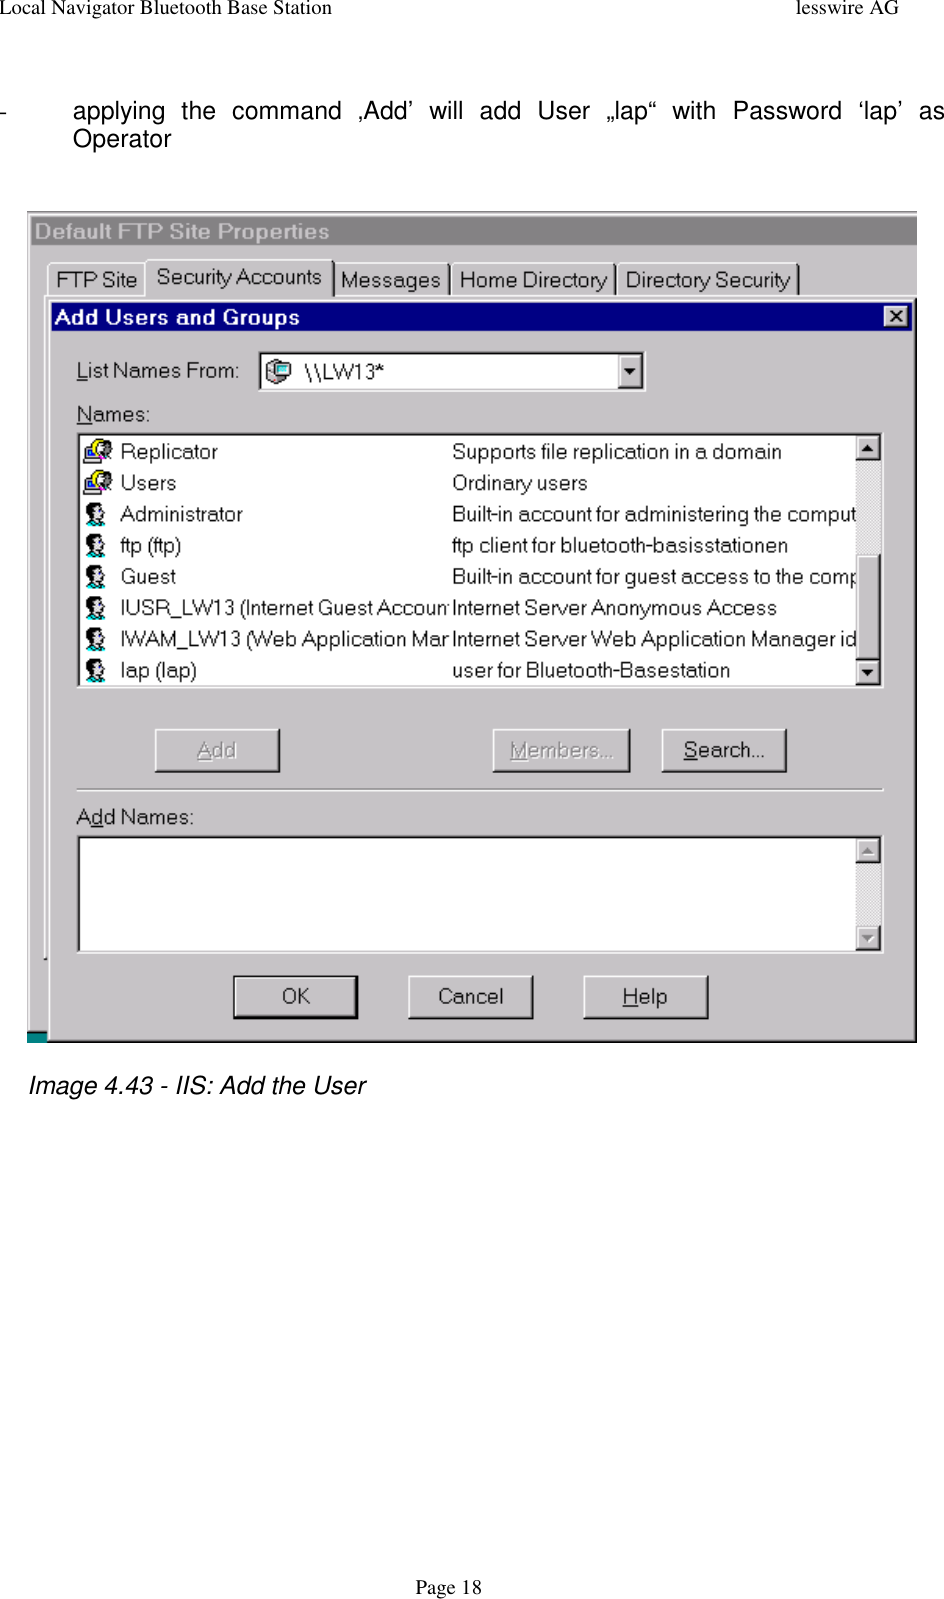 Local Navigator Bluetooth Base Station lesswire AGPage 18-  applying the command ‚Add’ will add User „lap“ with Password ‘lap’ asOperator    Image 4.43 - IIS: Add the User